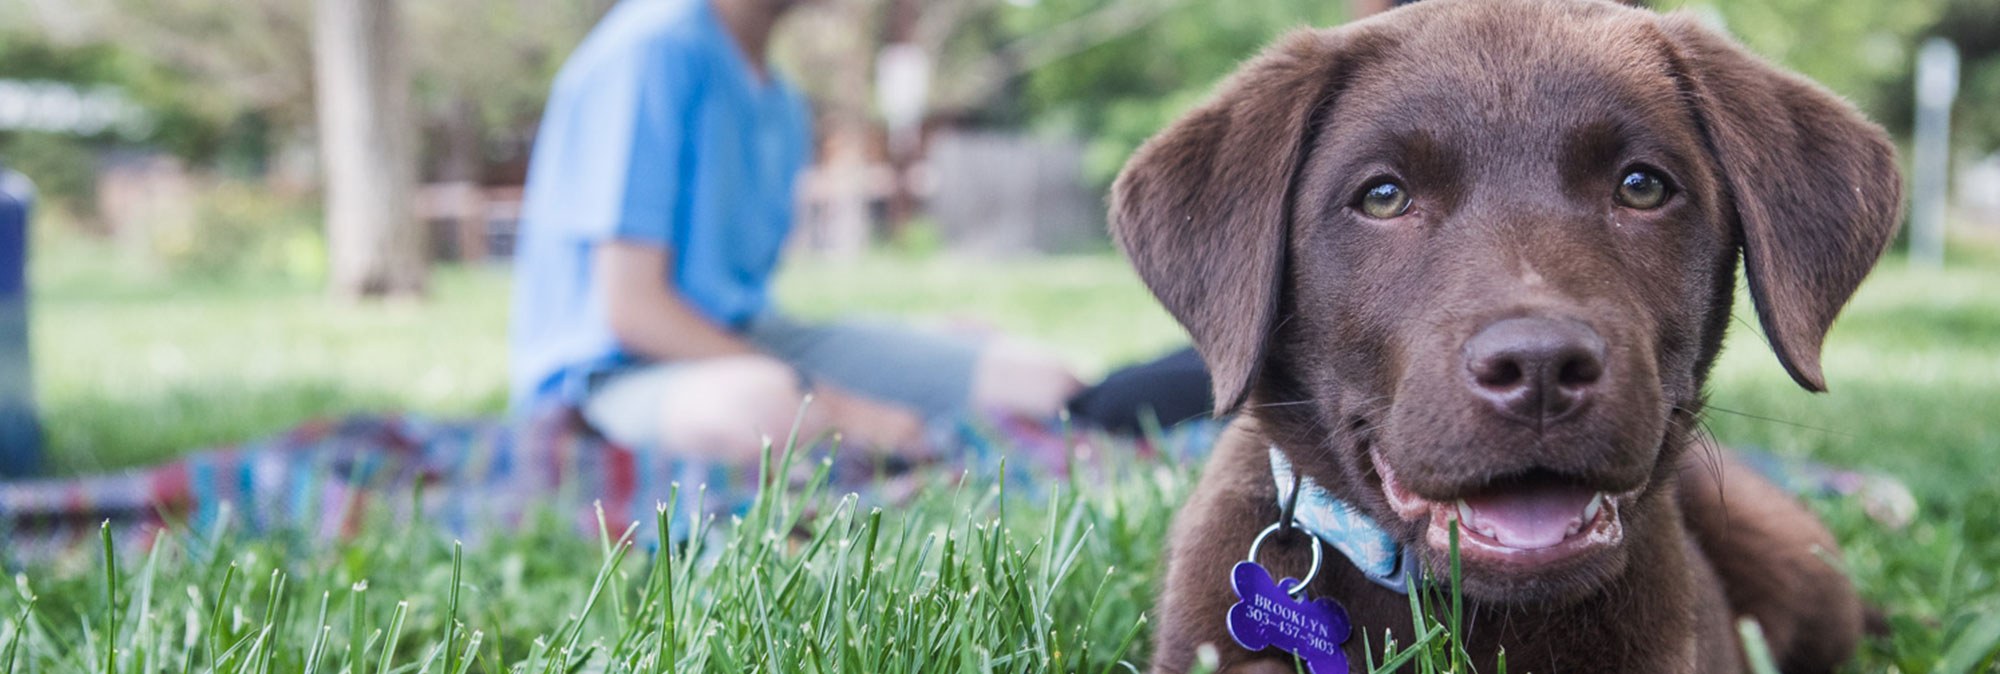 Brown puppy with blue tag, brown dog with purple tag, person on grass, close-ups of eye, nose, ear, tongue.